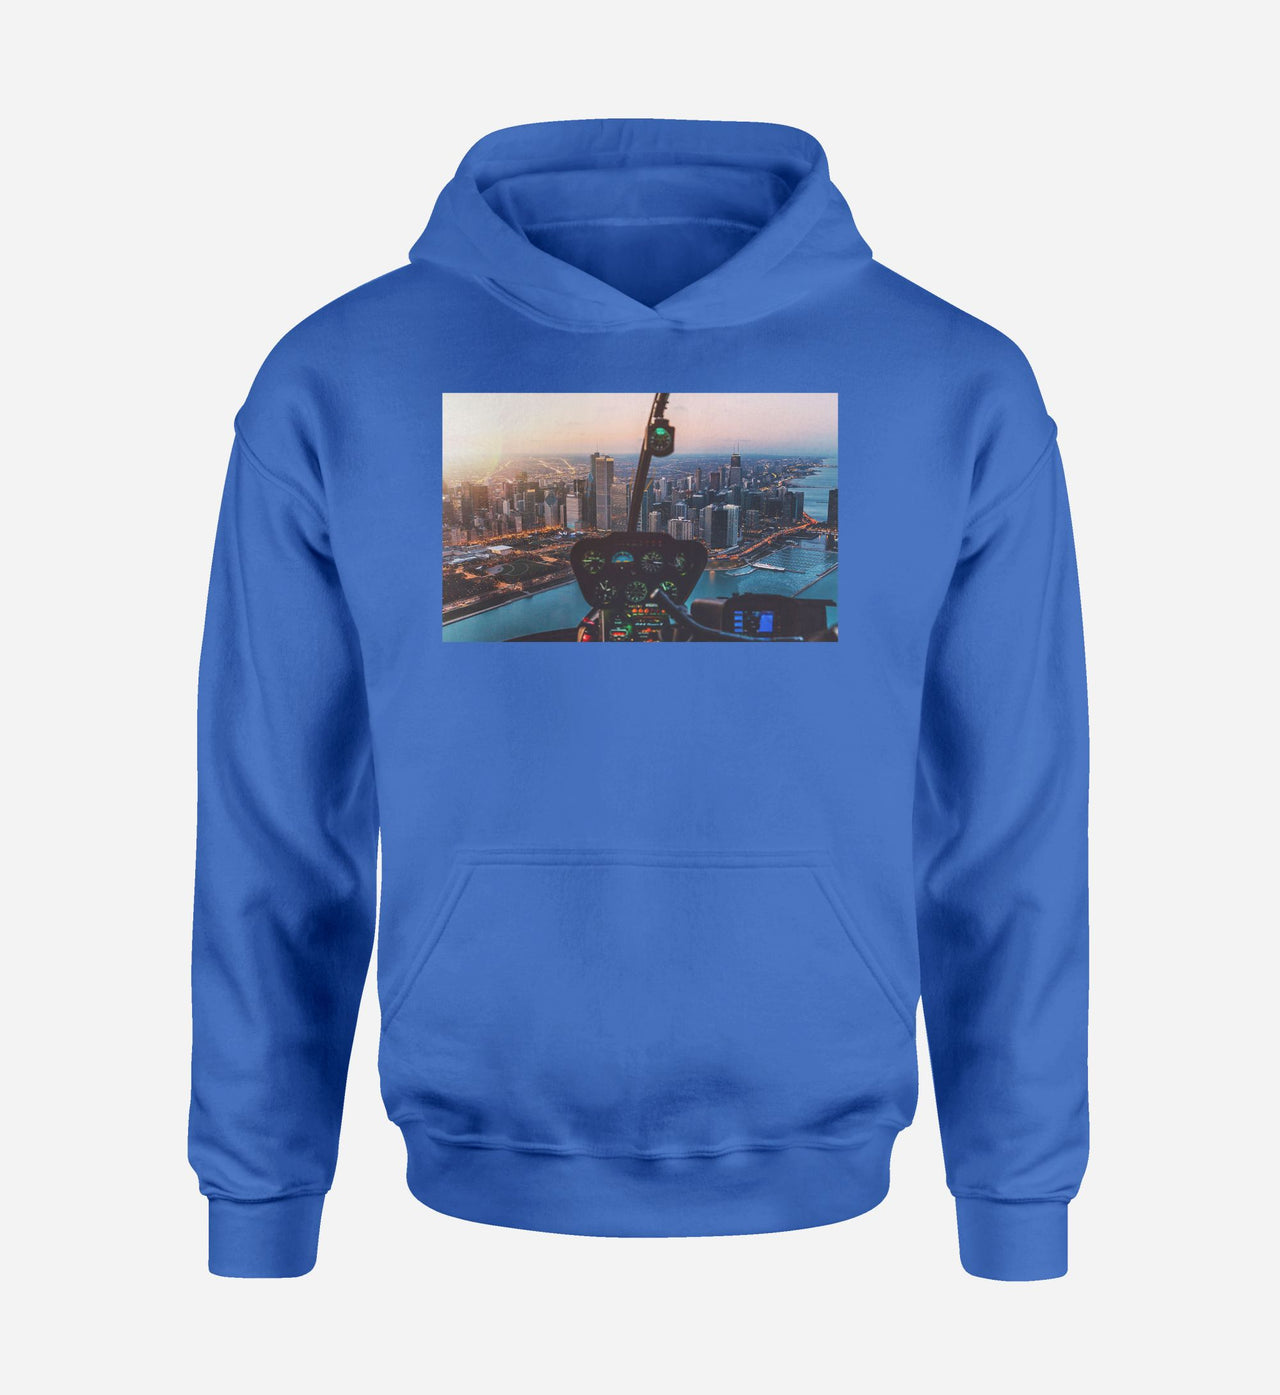 Amazing City View from Helicopter Cockpit Designed Hoodies